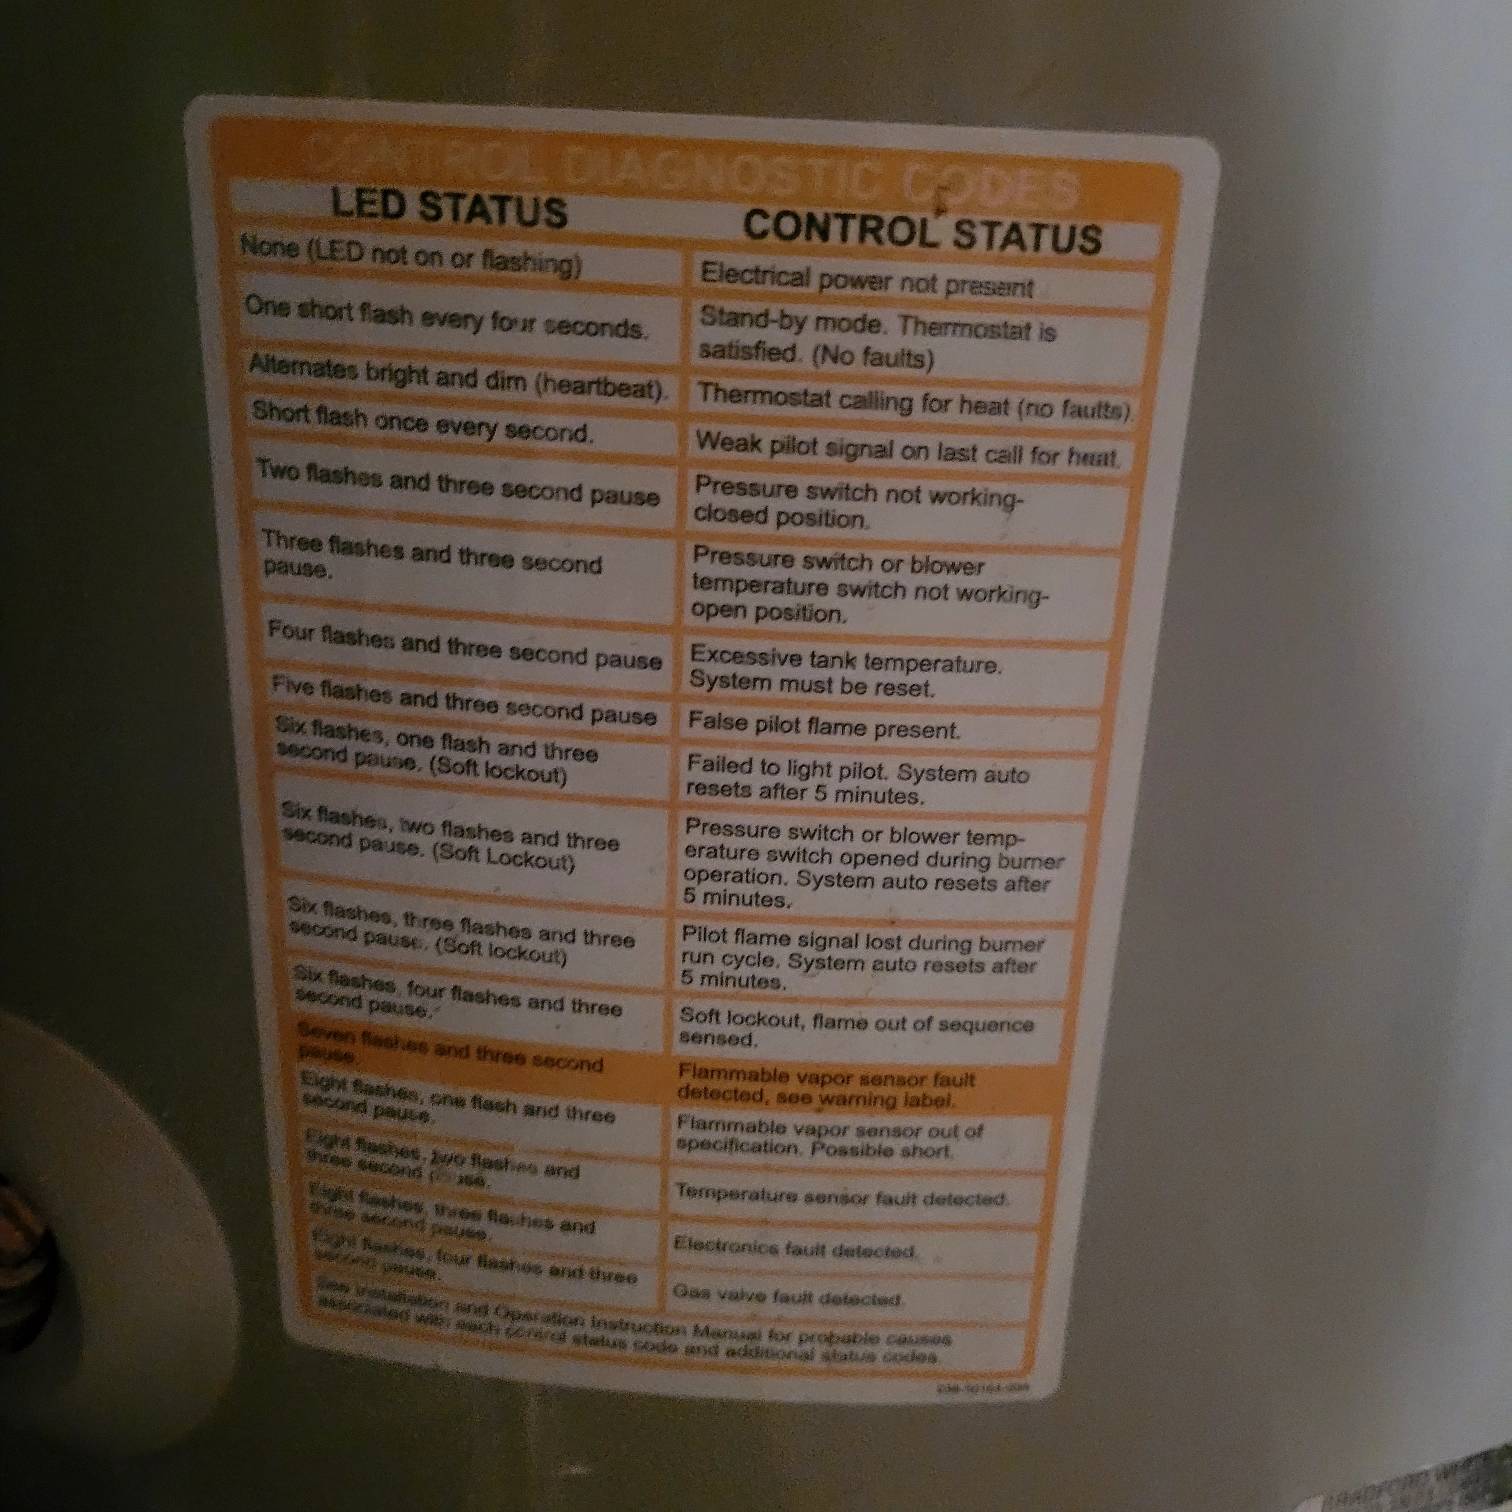 The diagnostic chart on a water heater